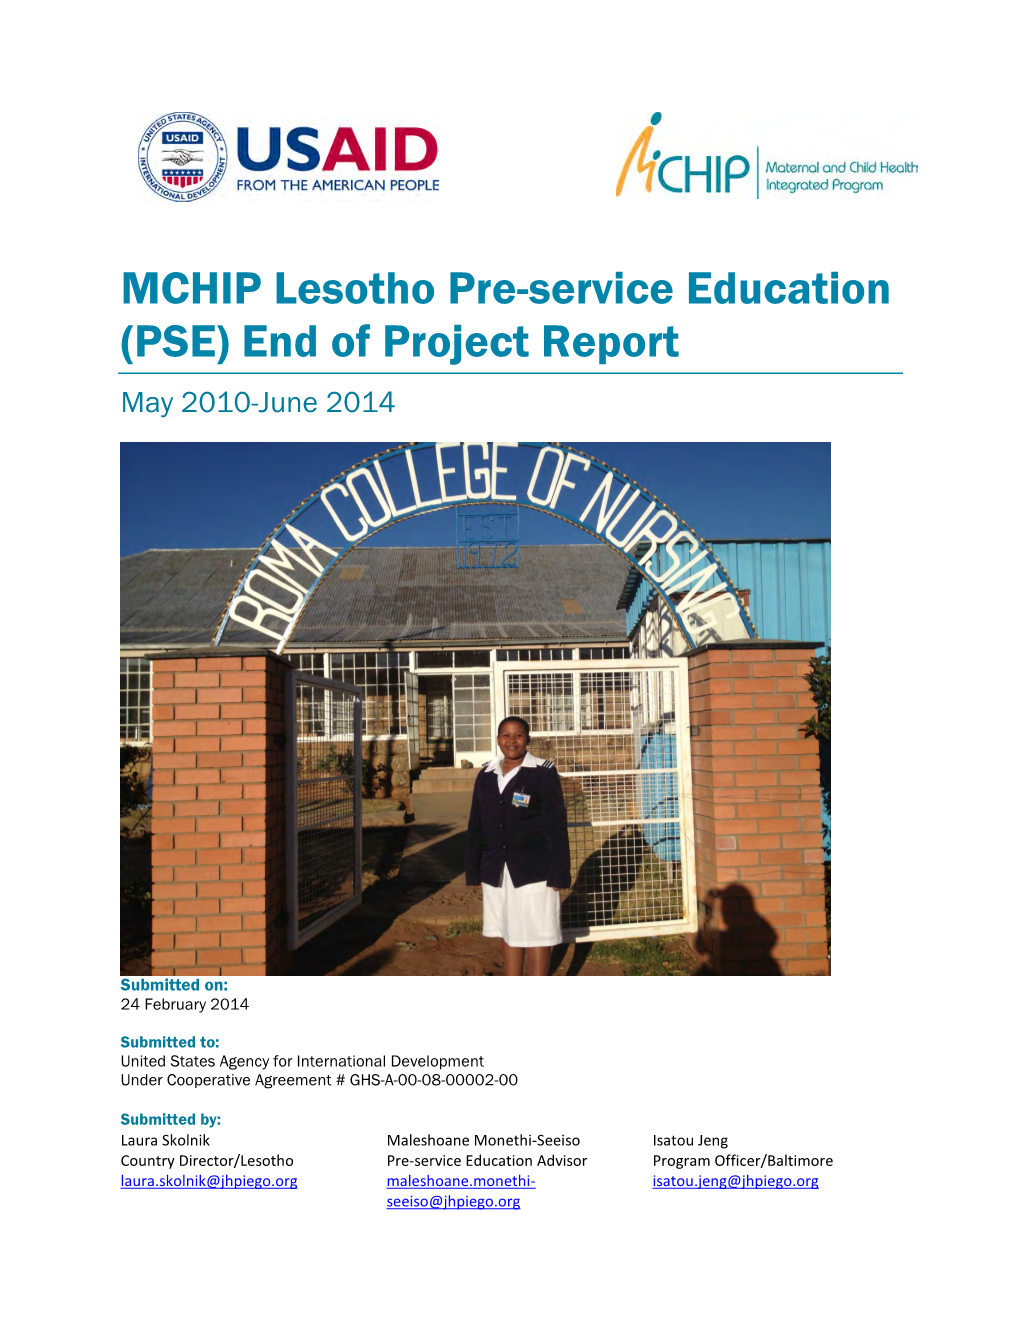 MCHIP Lesotho Pre-Service Education (PSE) End of Project Report May 2010-June 2014